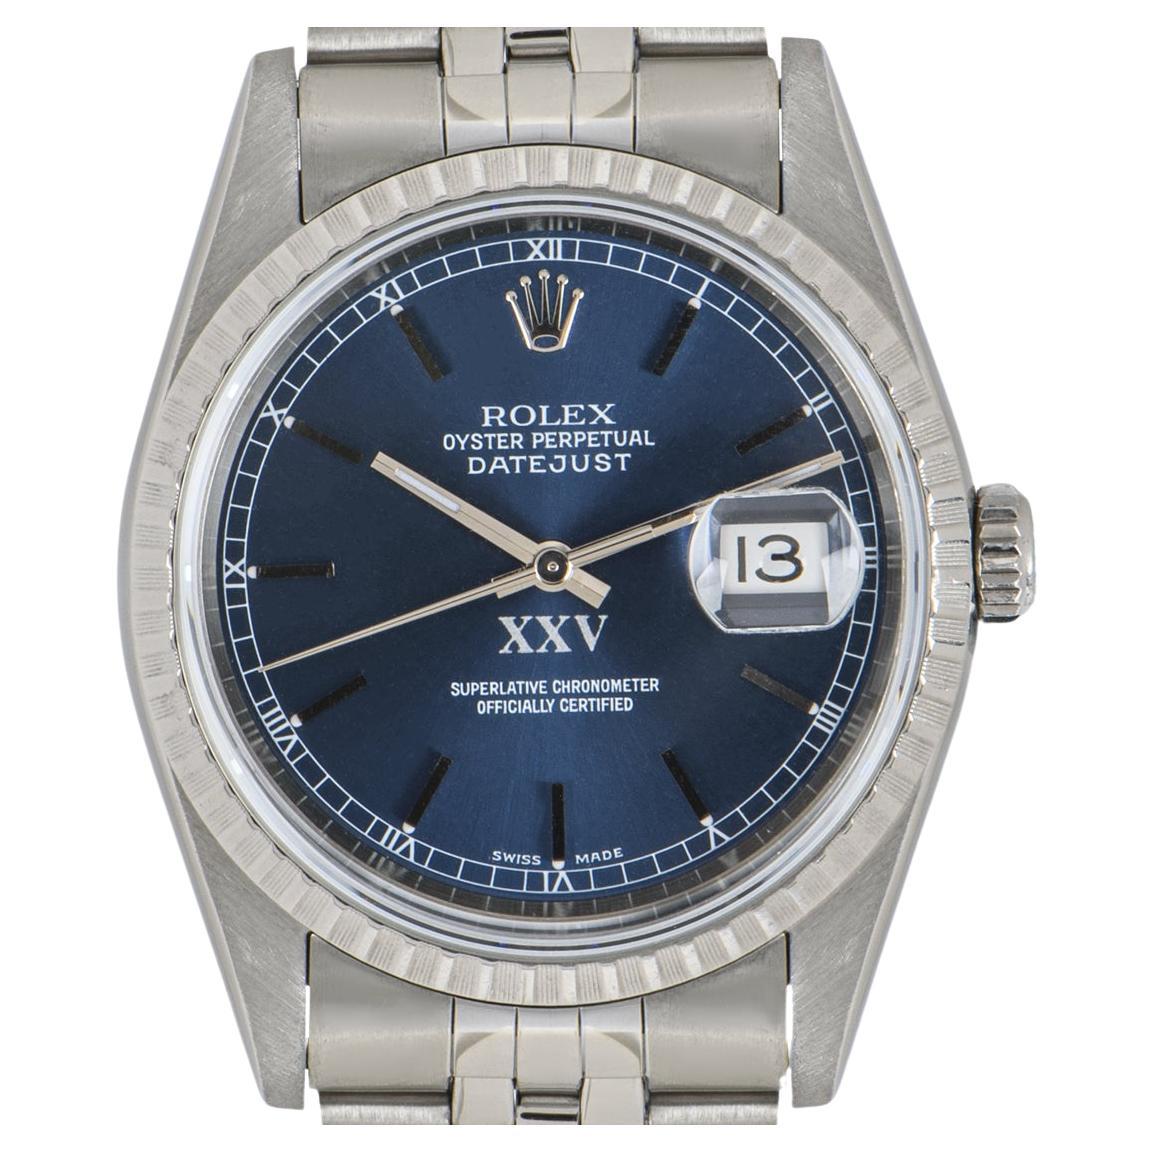 A 36mm Datejust in stainless steel by Rolex. Features a blue dial and a fixed stainless steel fluted bezel. The Jubilee bracelet comes with an Oyster deployant clasp.

Fitted with sapphire crystal and a self-winding automatic movement. This